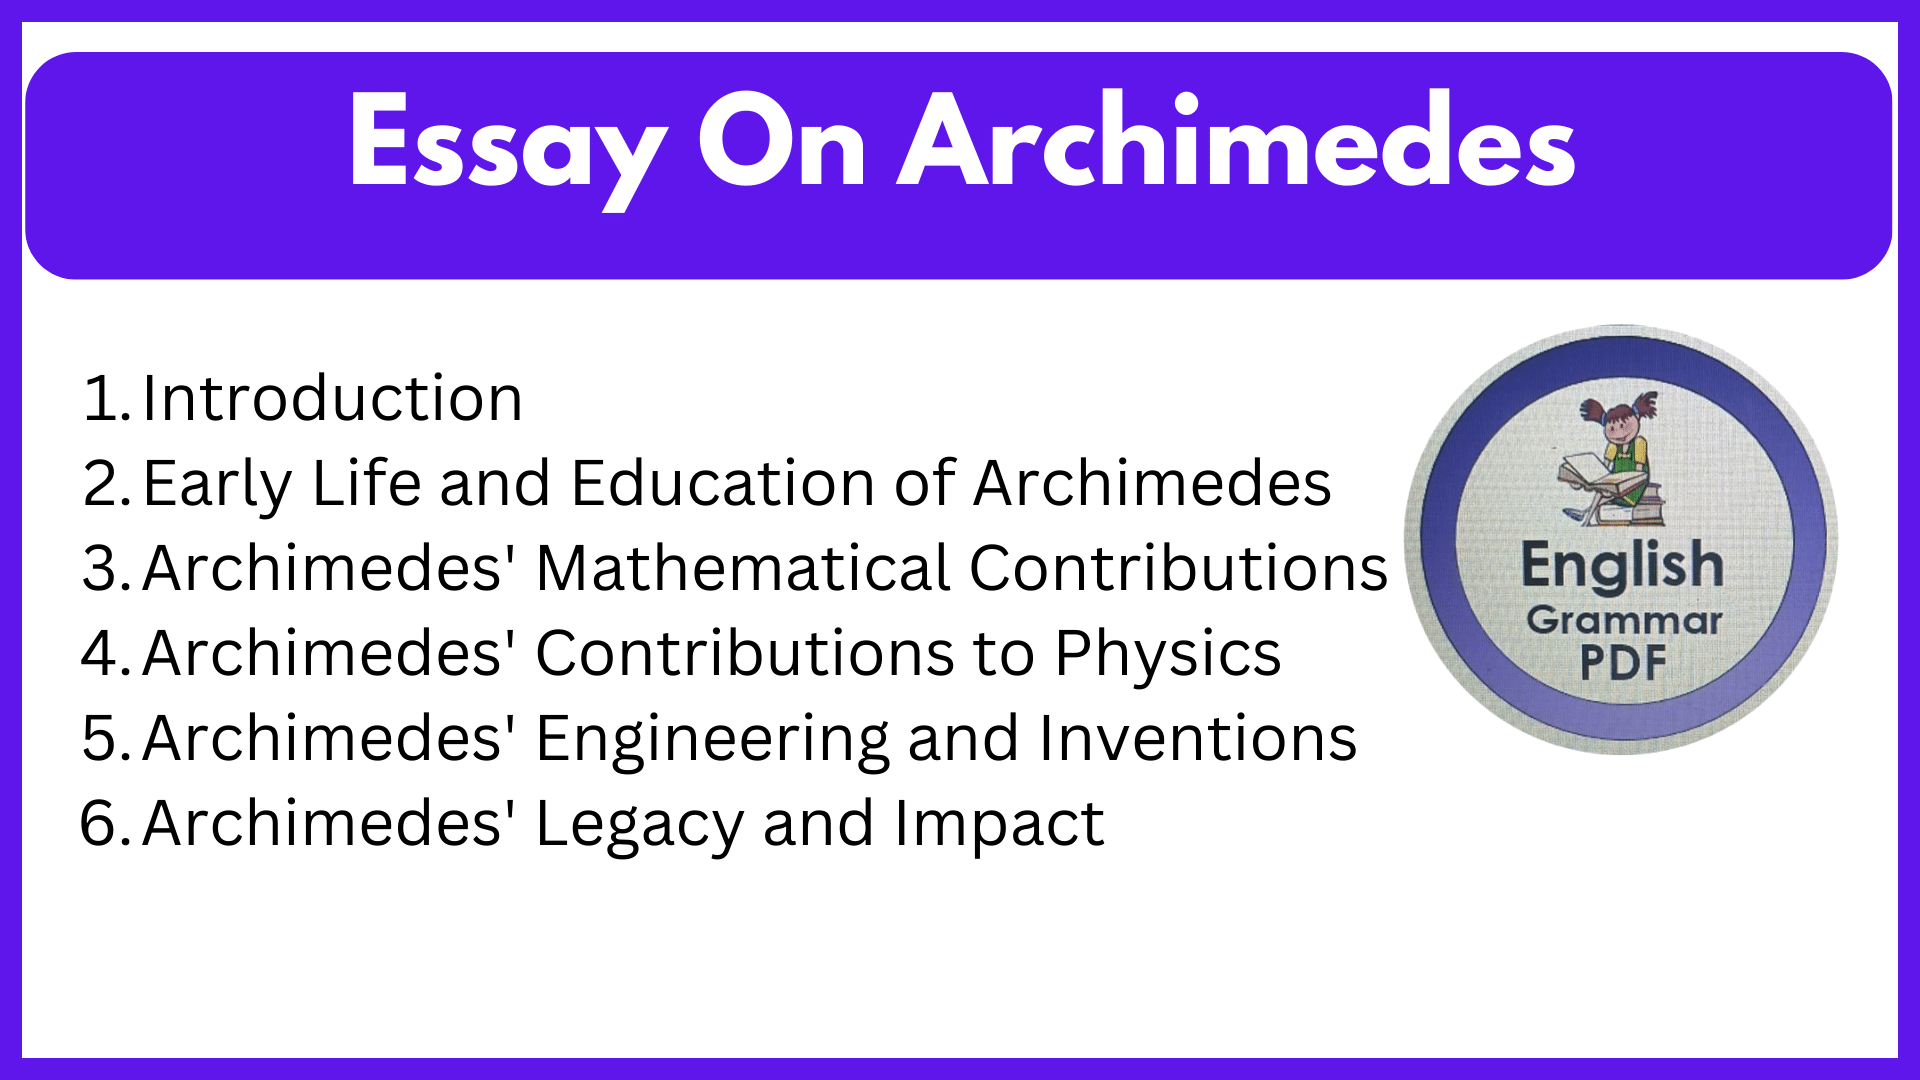 Essay On Archimedes